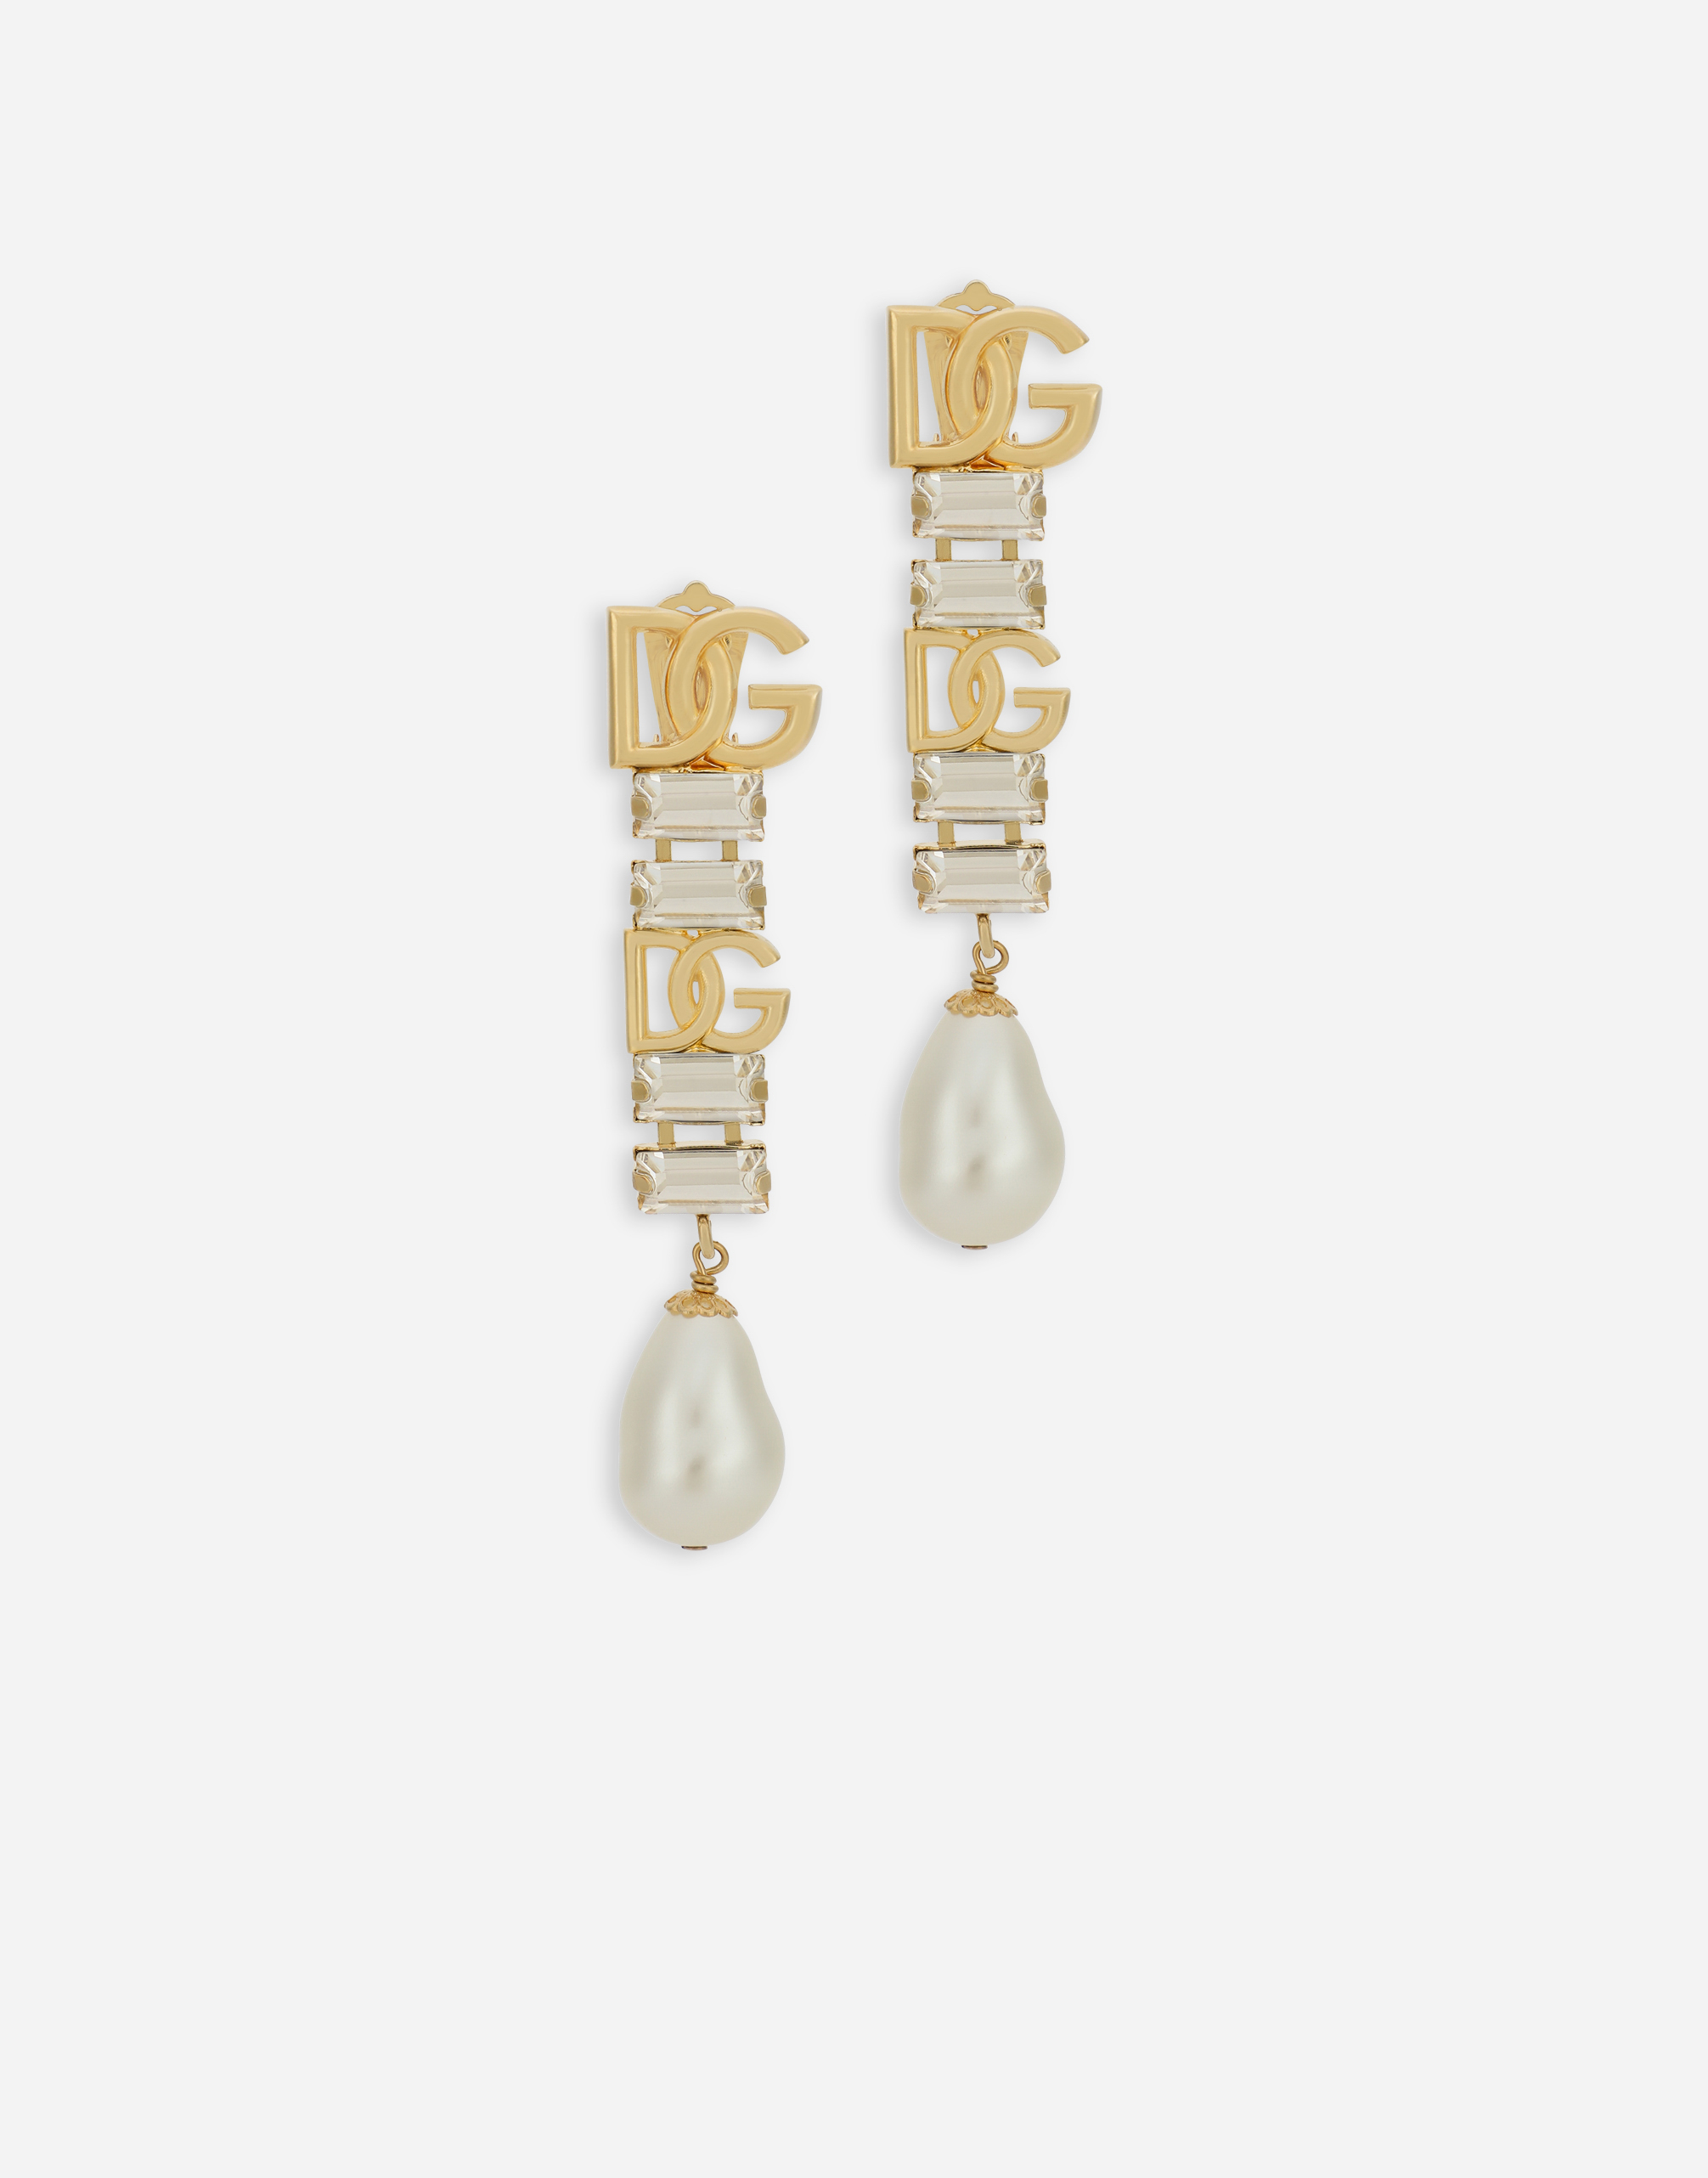 Drop earrings with pearls, rhinestones and DG logo in Gold